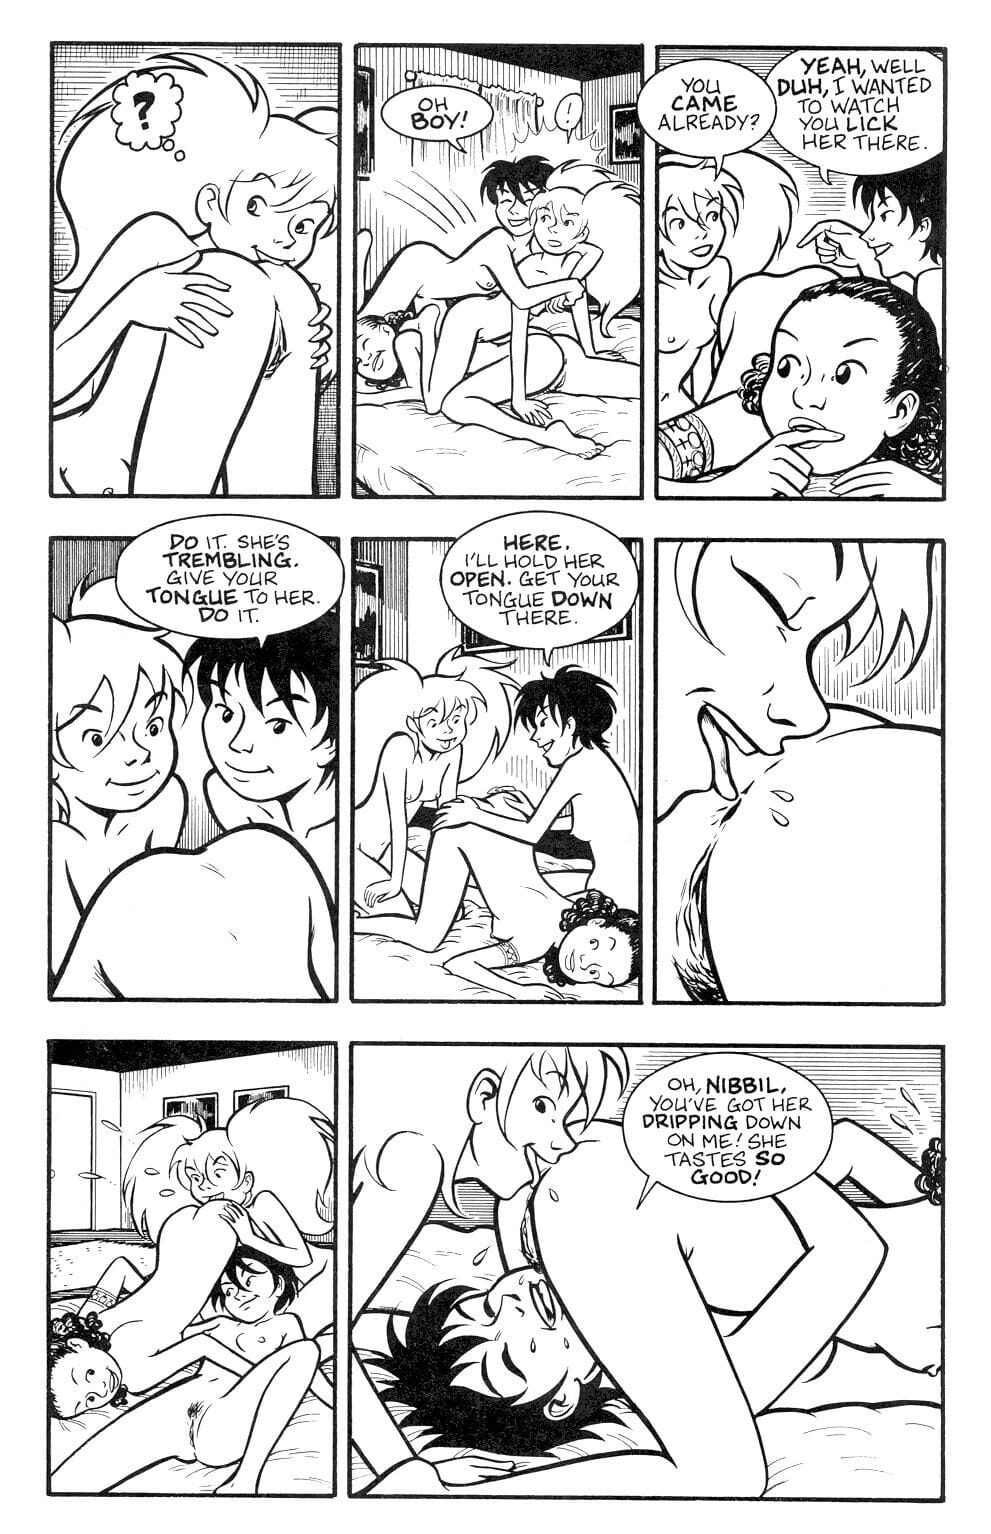 Small Favors Issue #5 ENG page 1